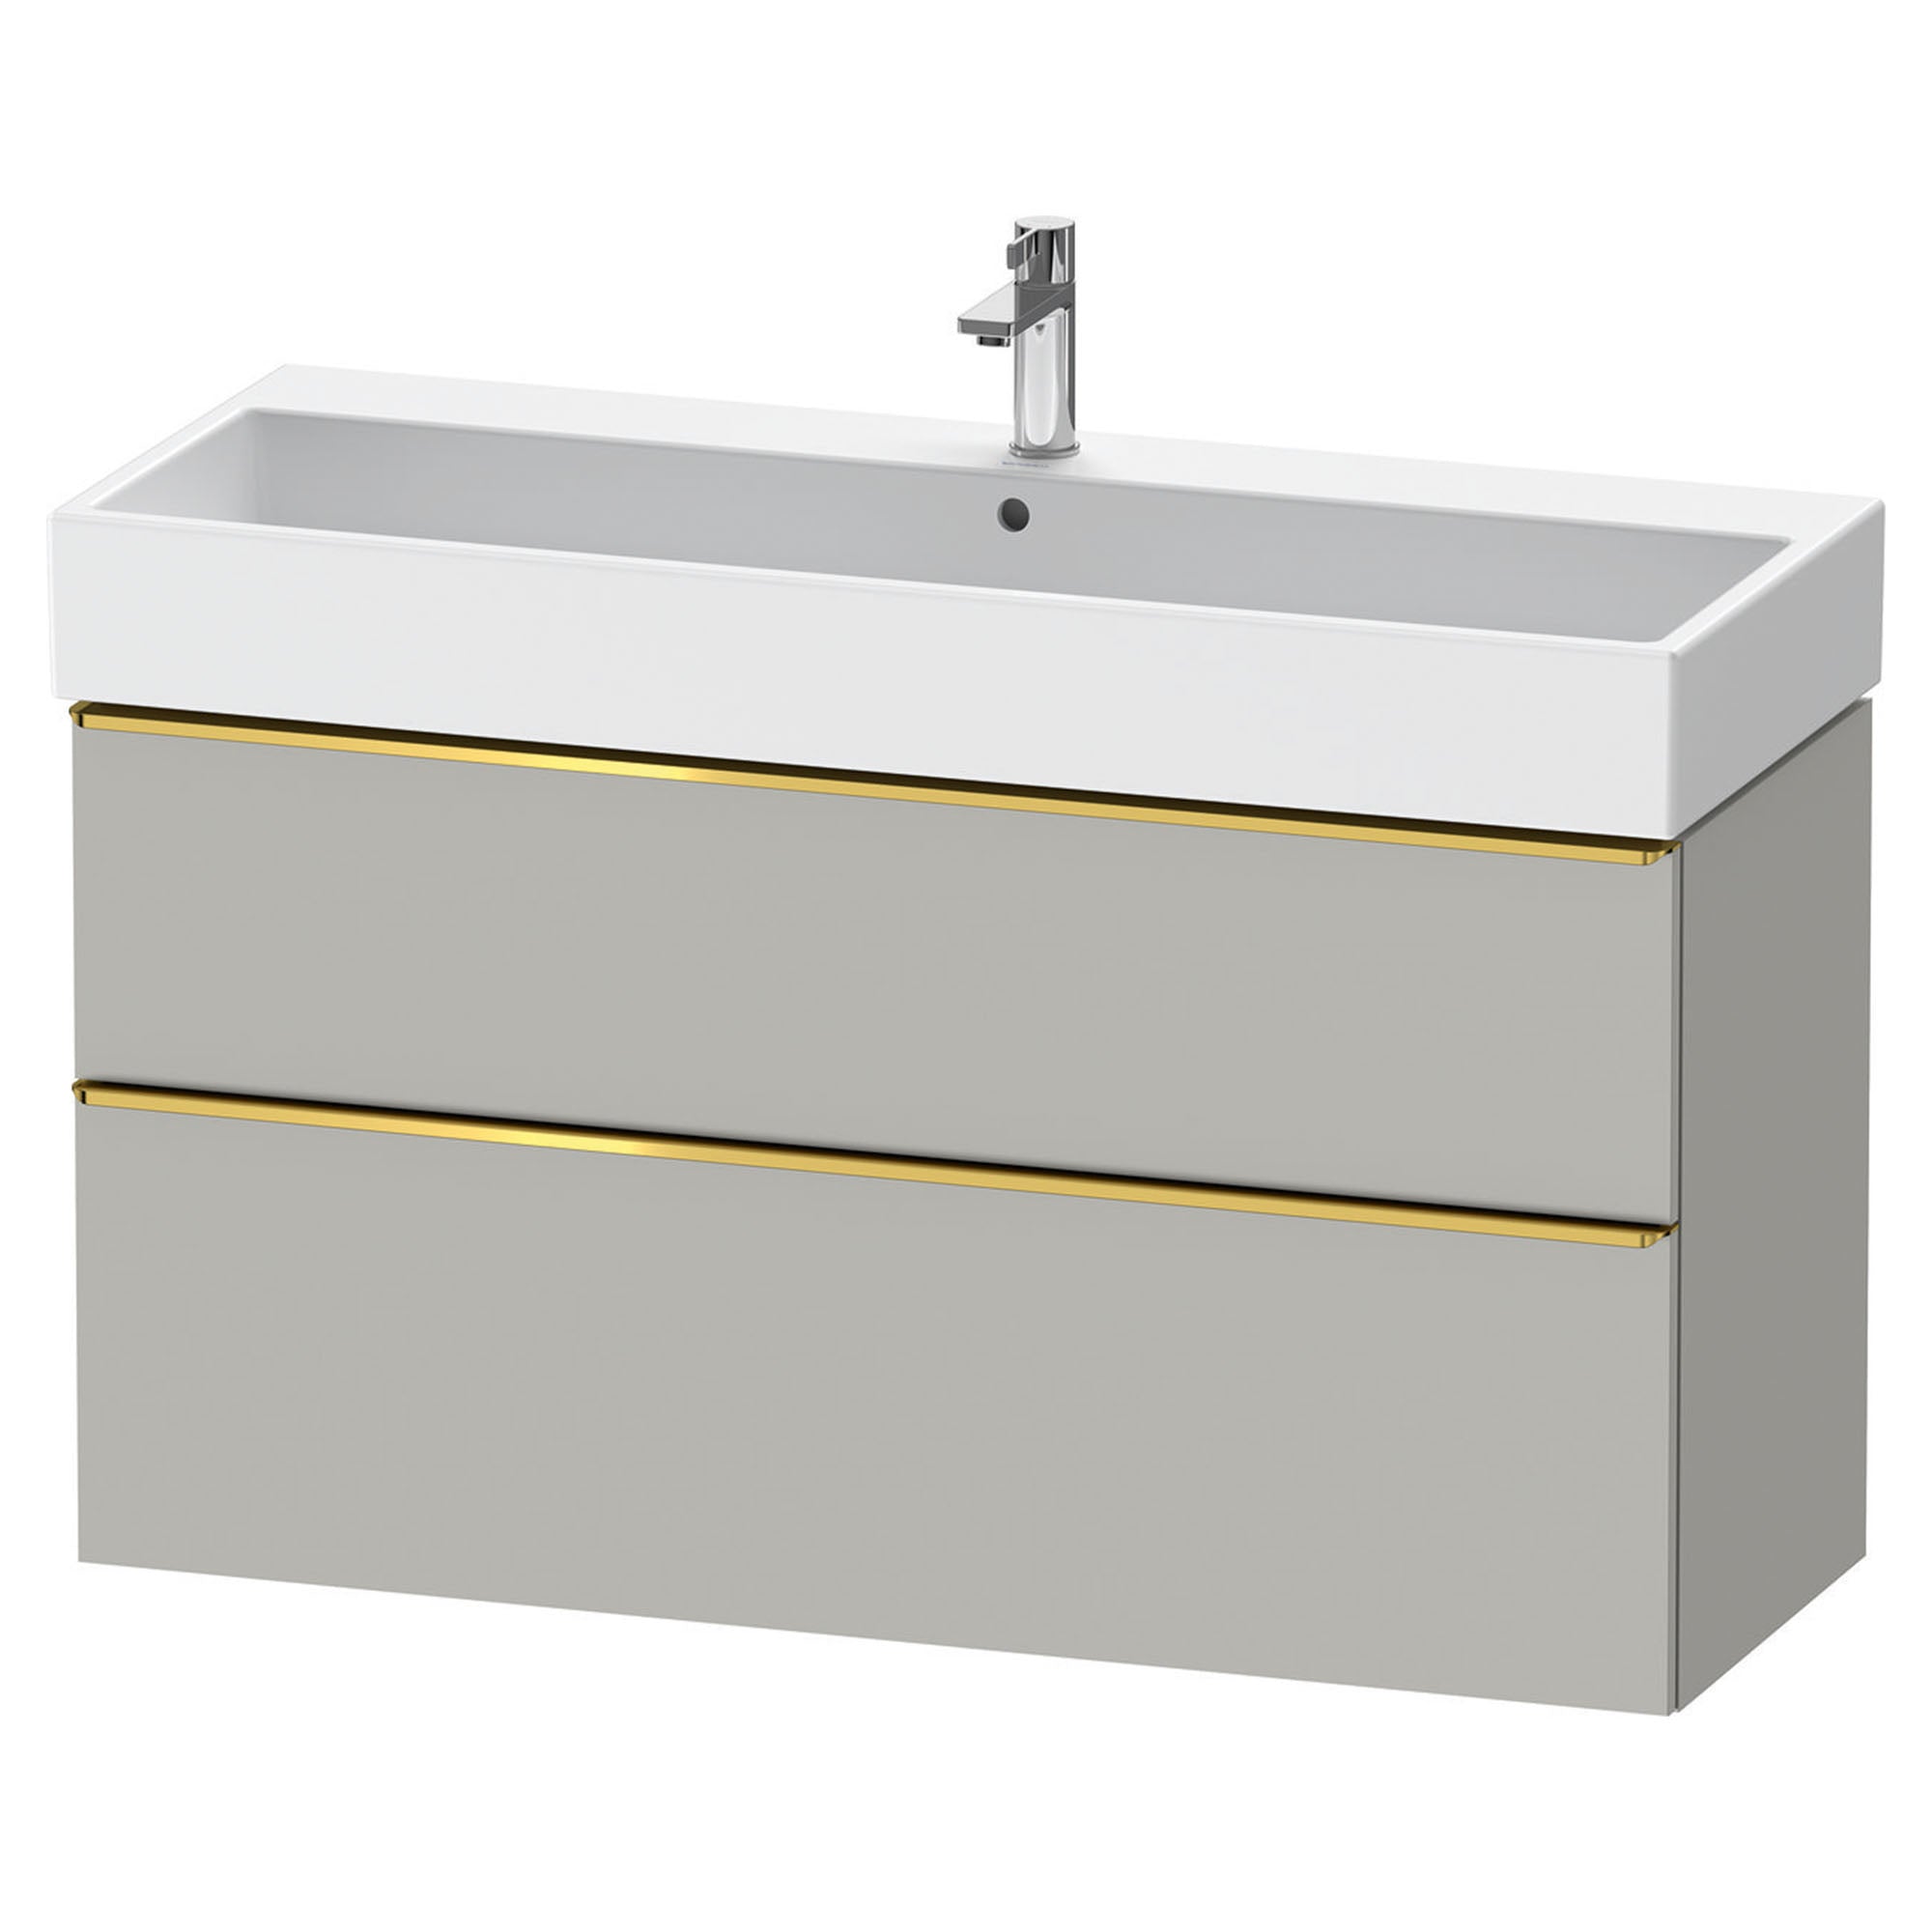 duravit d-neo 1200 wall mounted vanity-unit with vero basin concrete grey stainless steel handles